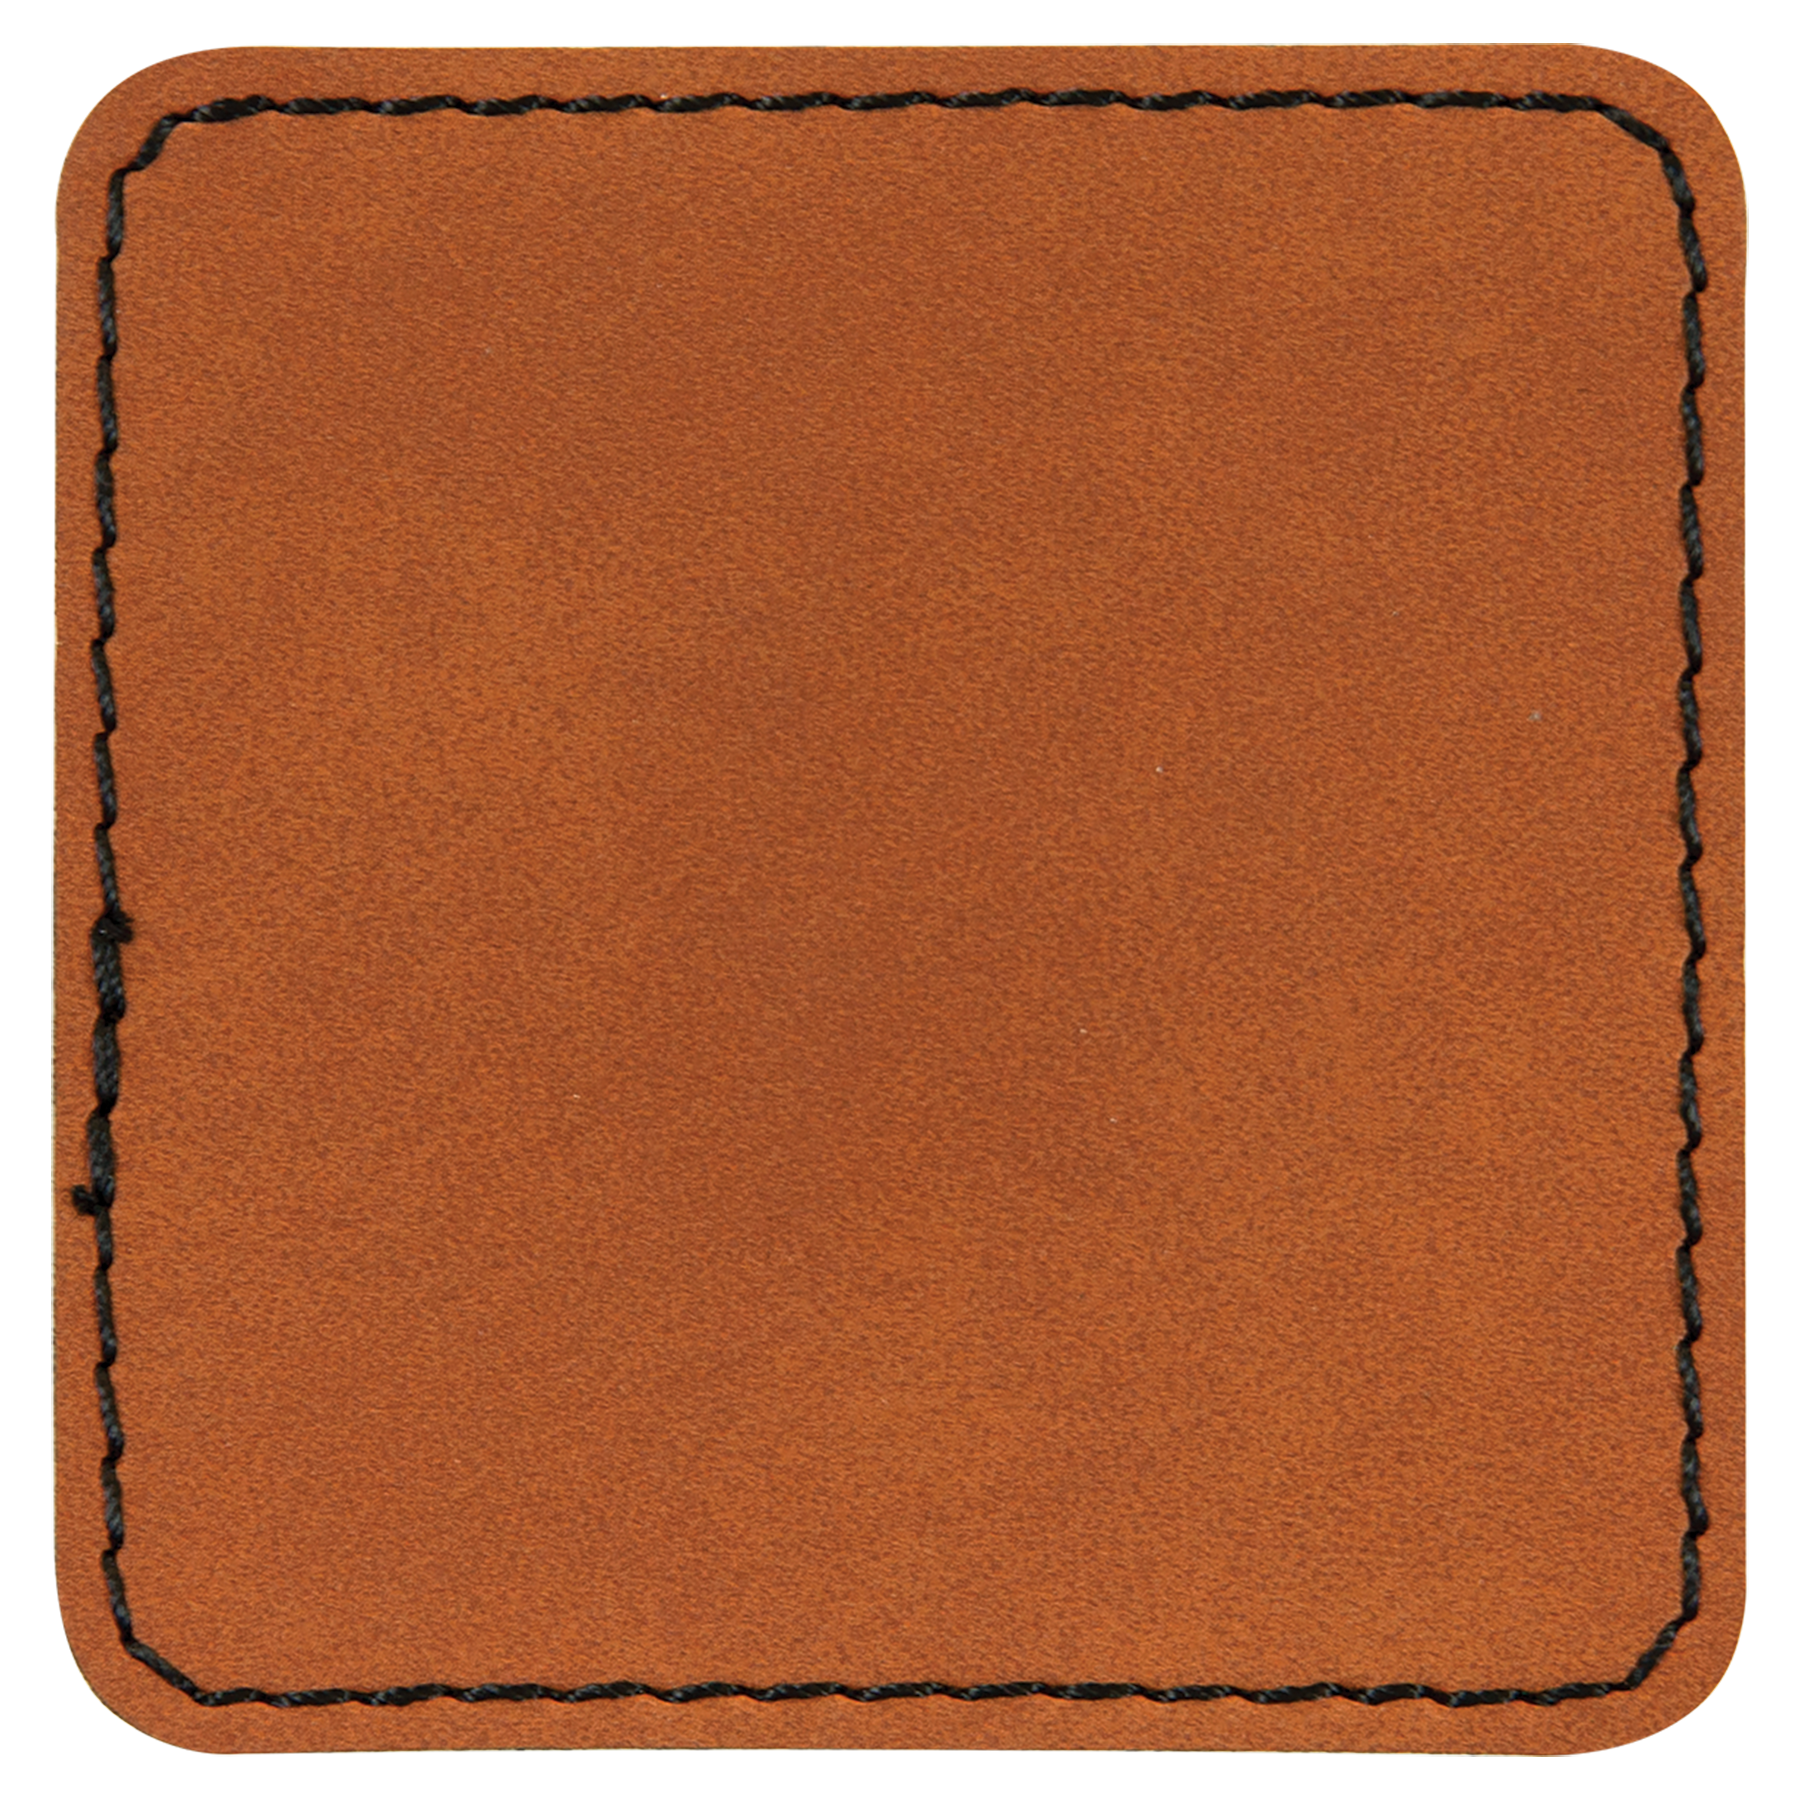 Leatherette Patch, SM Square 2.5 in x 2.5 in